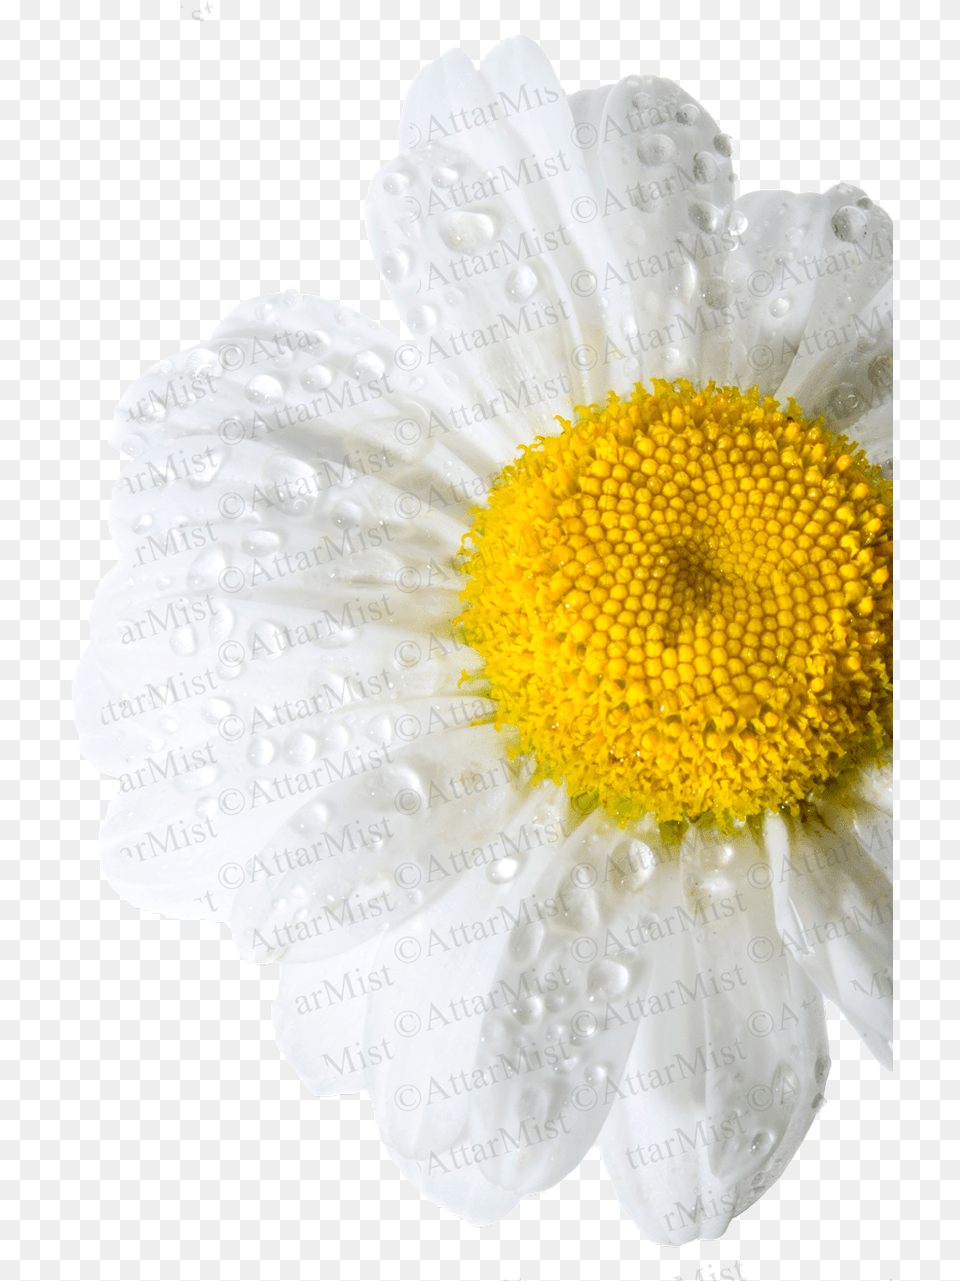 Rain Flower By Attar Mist Chamomile, Anemone, Anther, Daisy, Petal Free Png Download